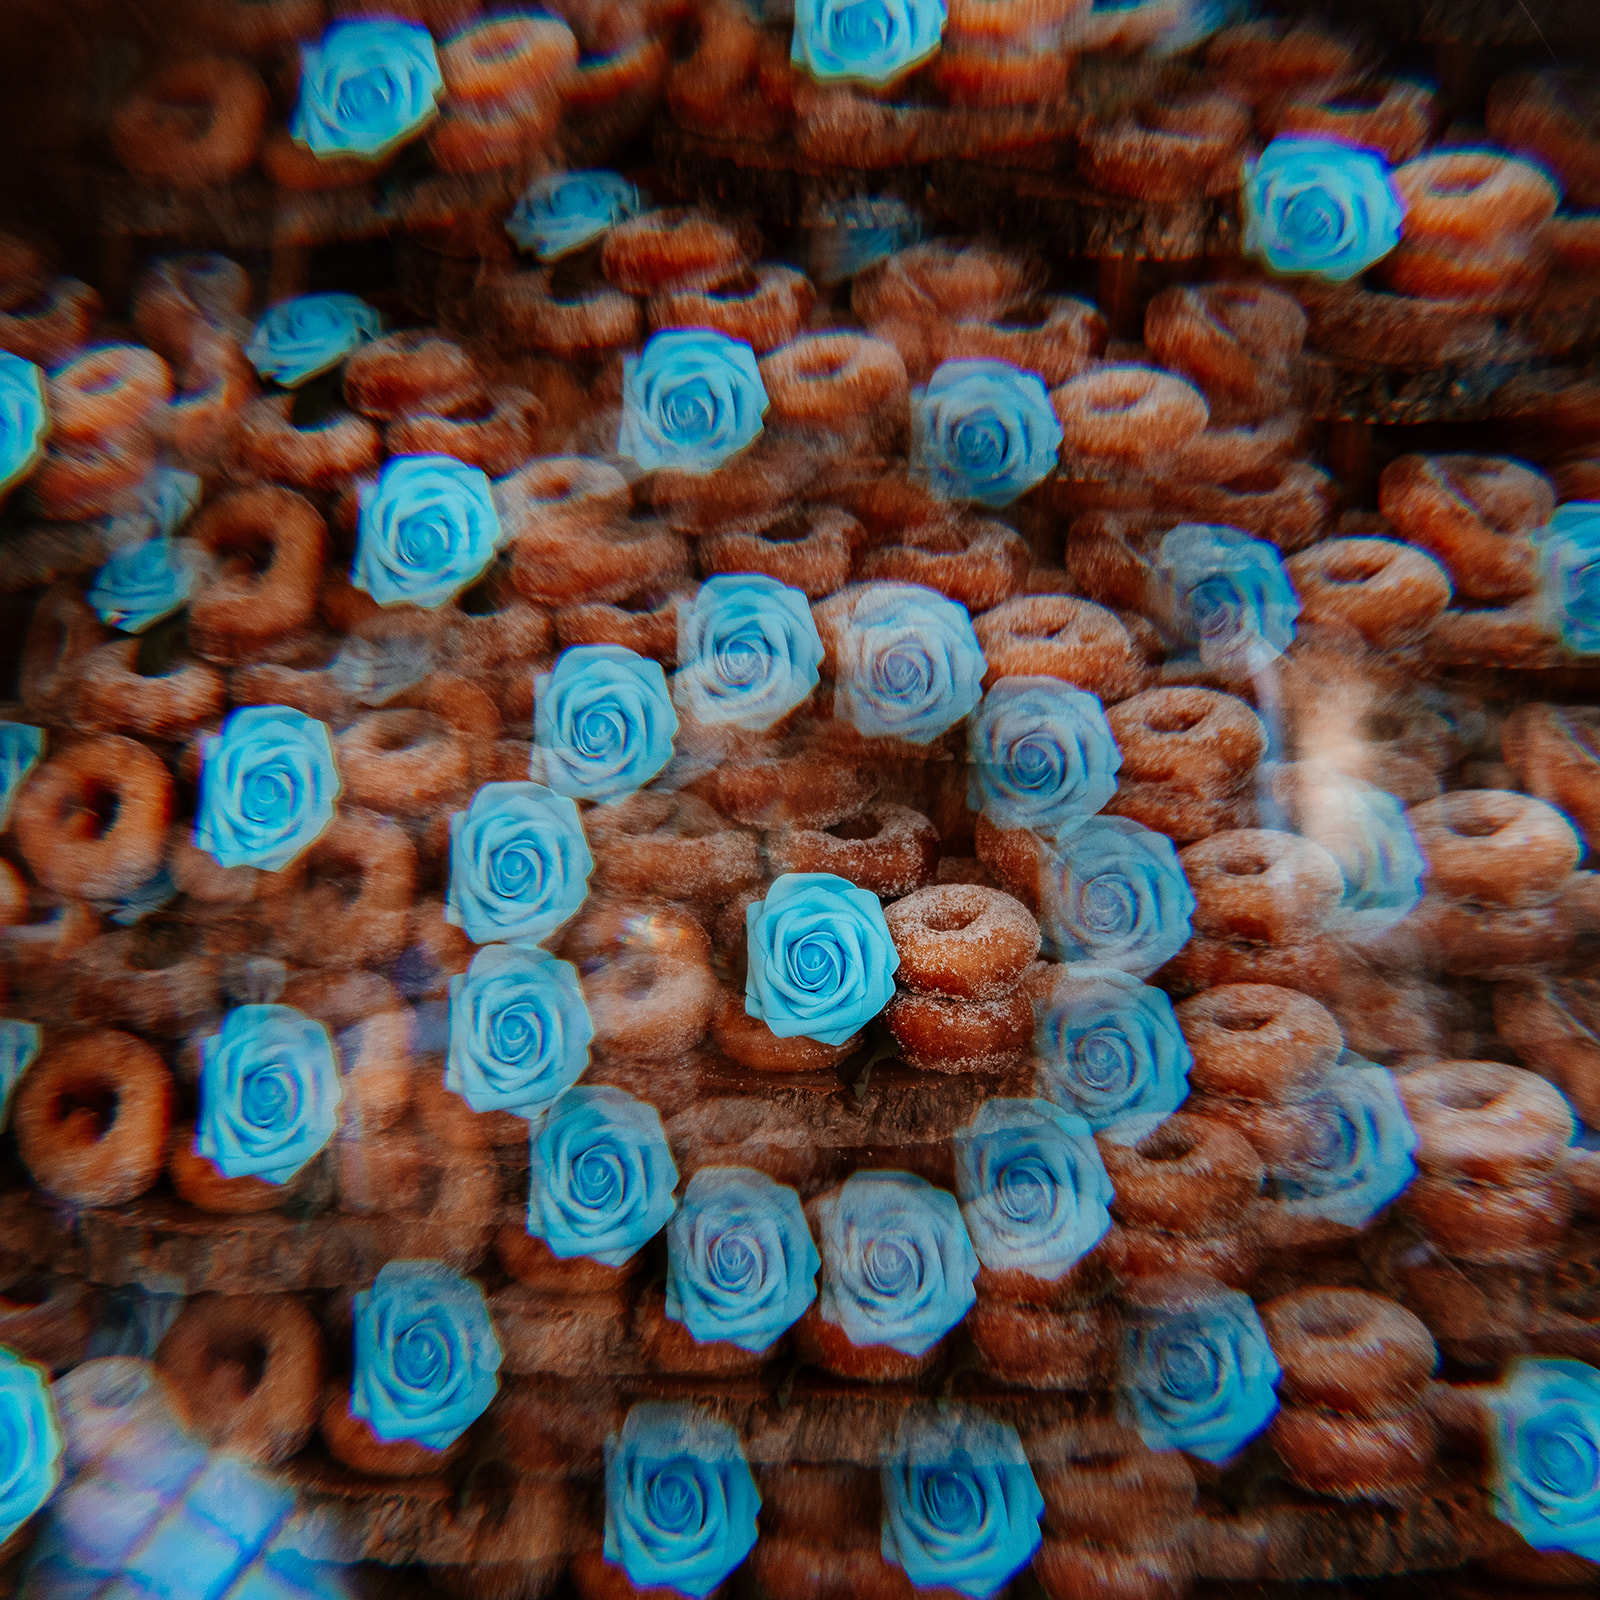 A kaleidoscope image of sugar covered ring doughnuts decorated with blue icing sugar roses.